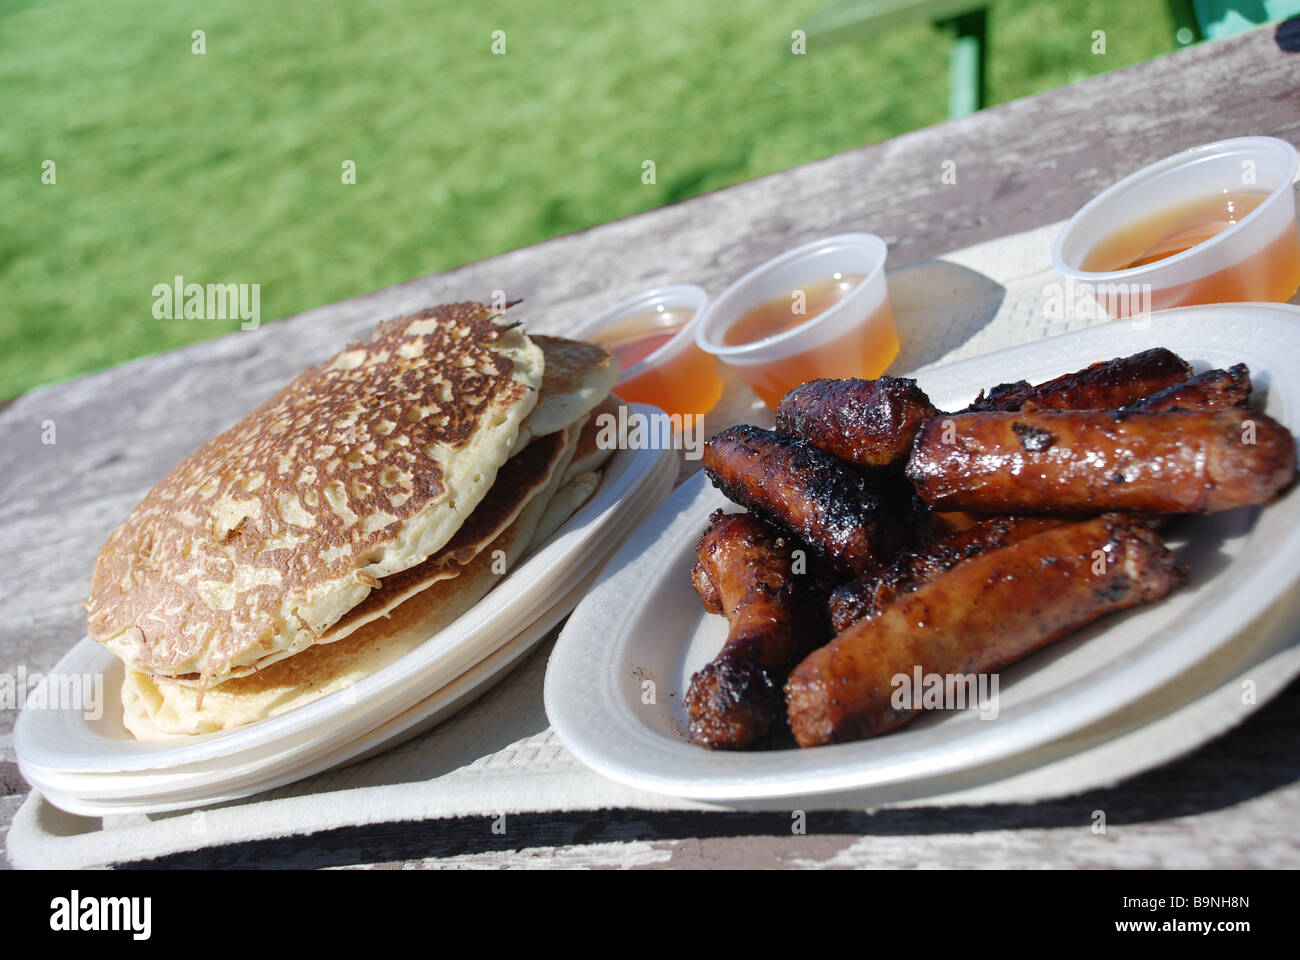 Breakfast with pancakes sausages and maple syrup Stock Photo